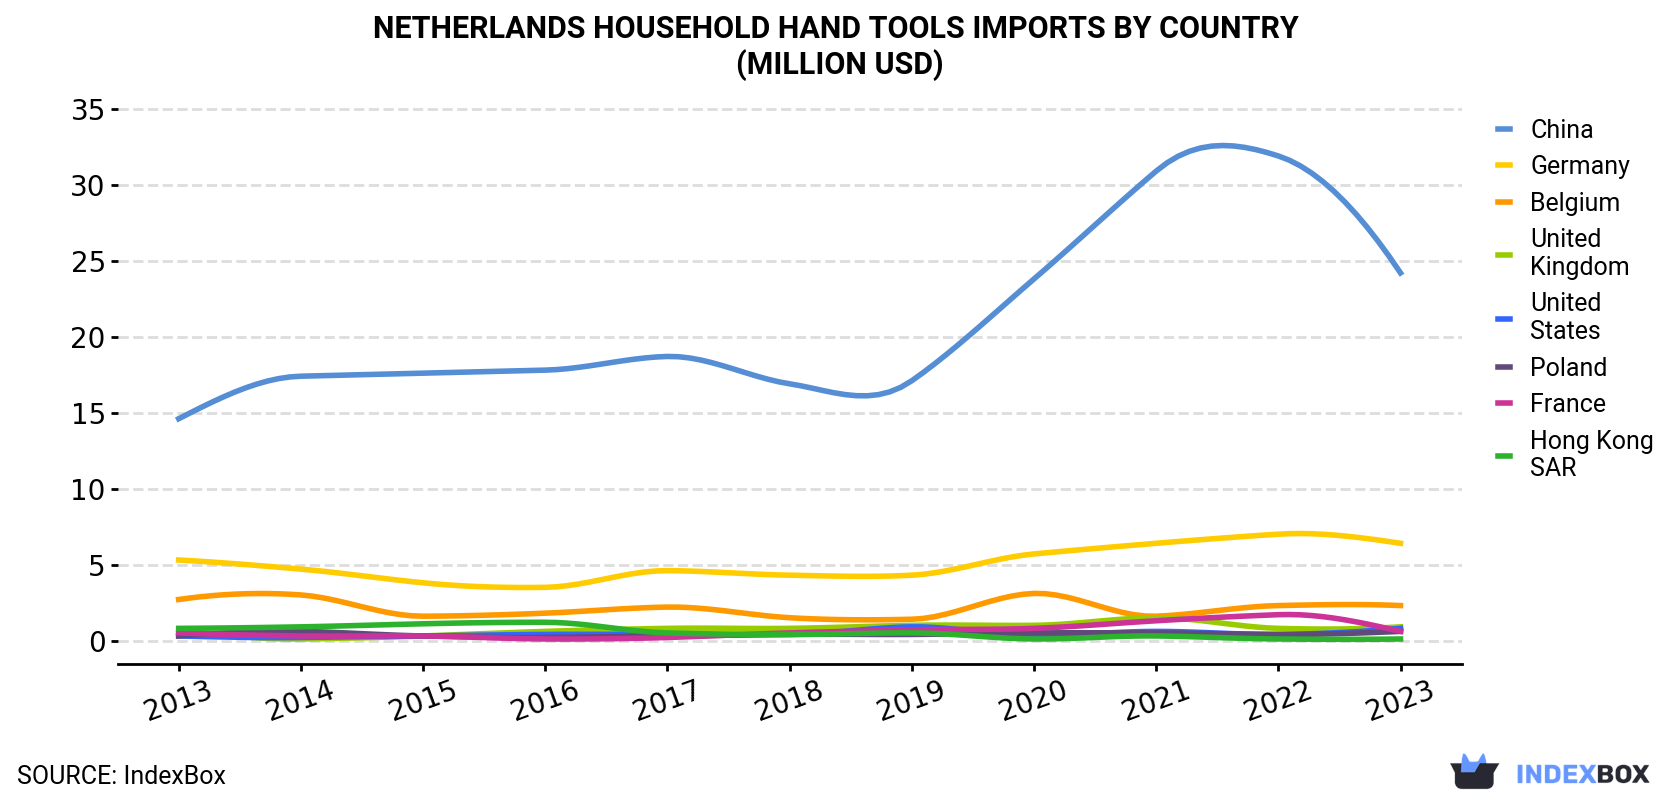 Netherlands Household Hand Tools Imports By Country (Million USD)